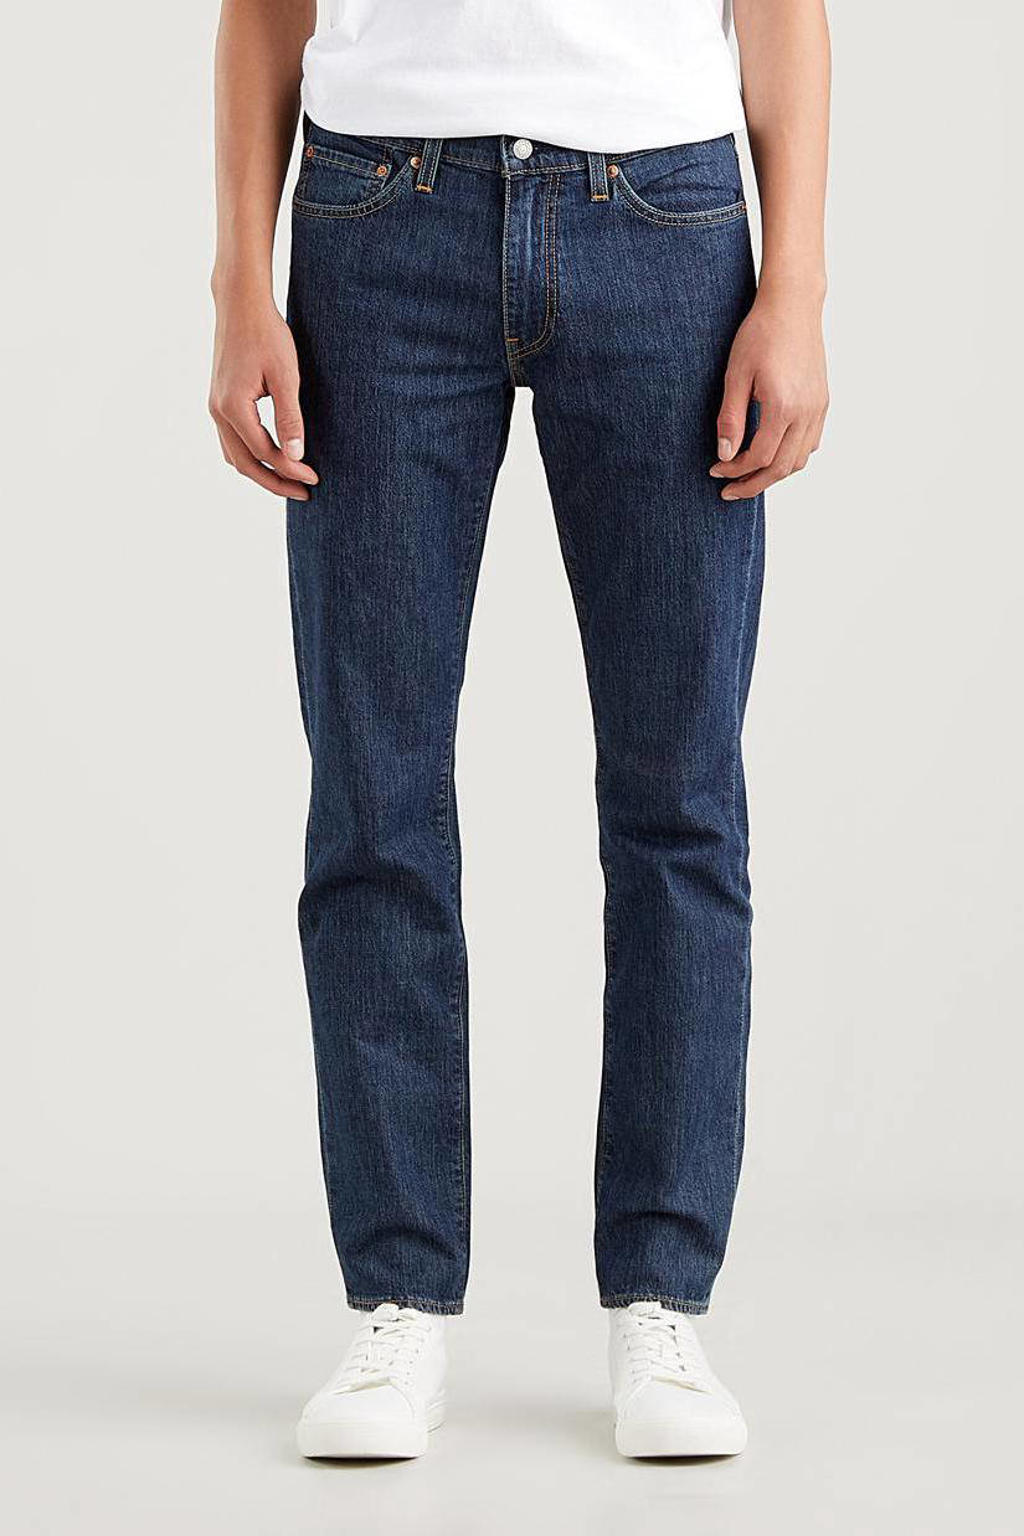 Levi's 511 slim fit jeans stormy cool